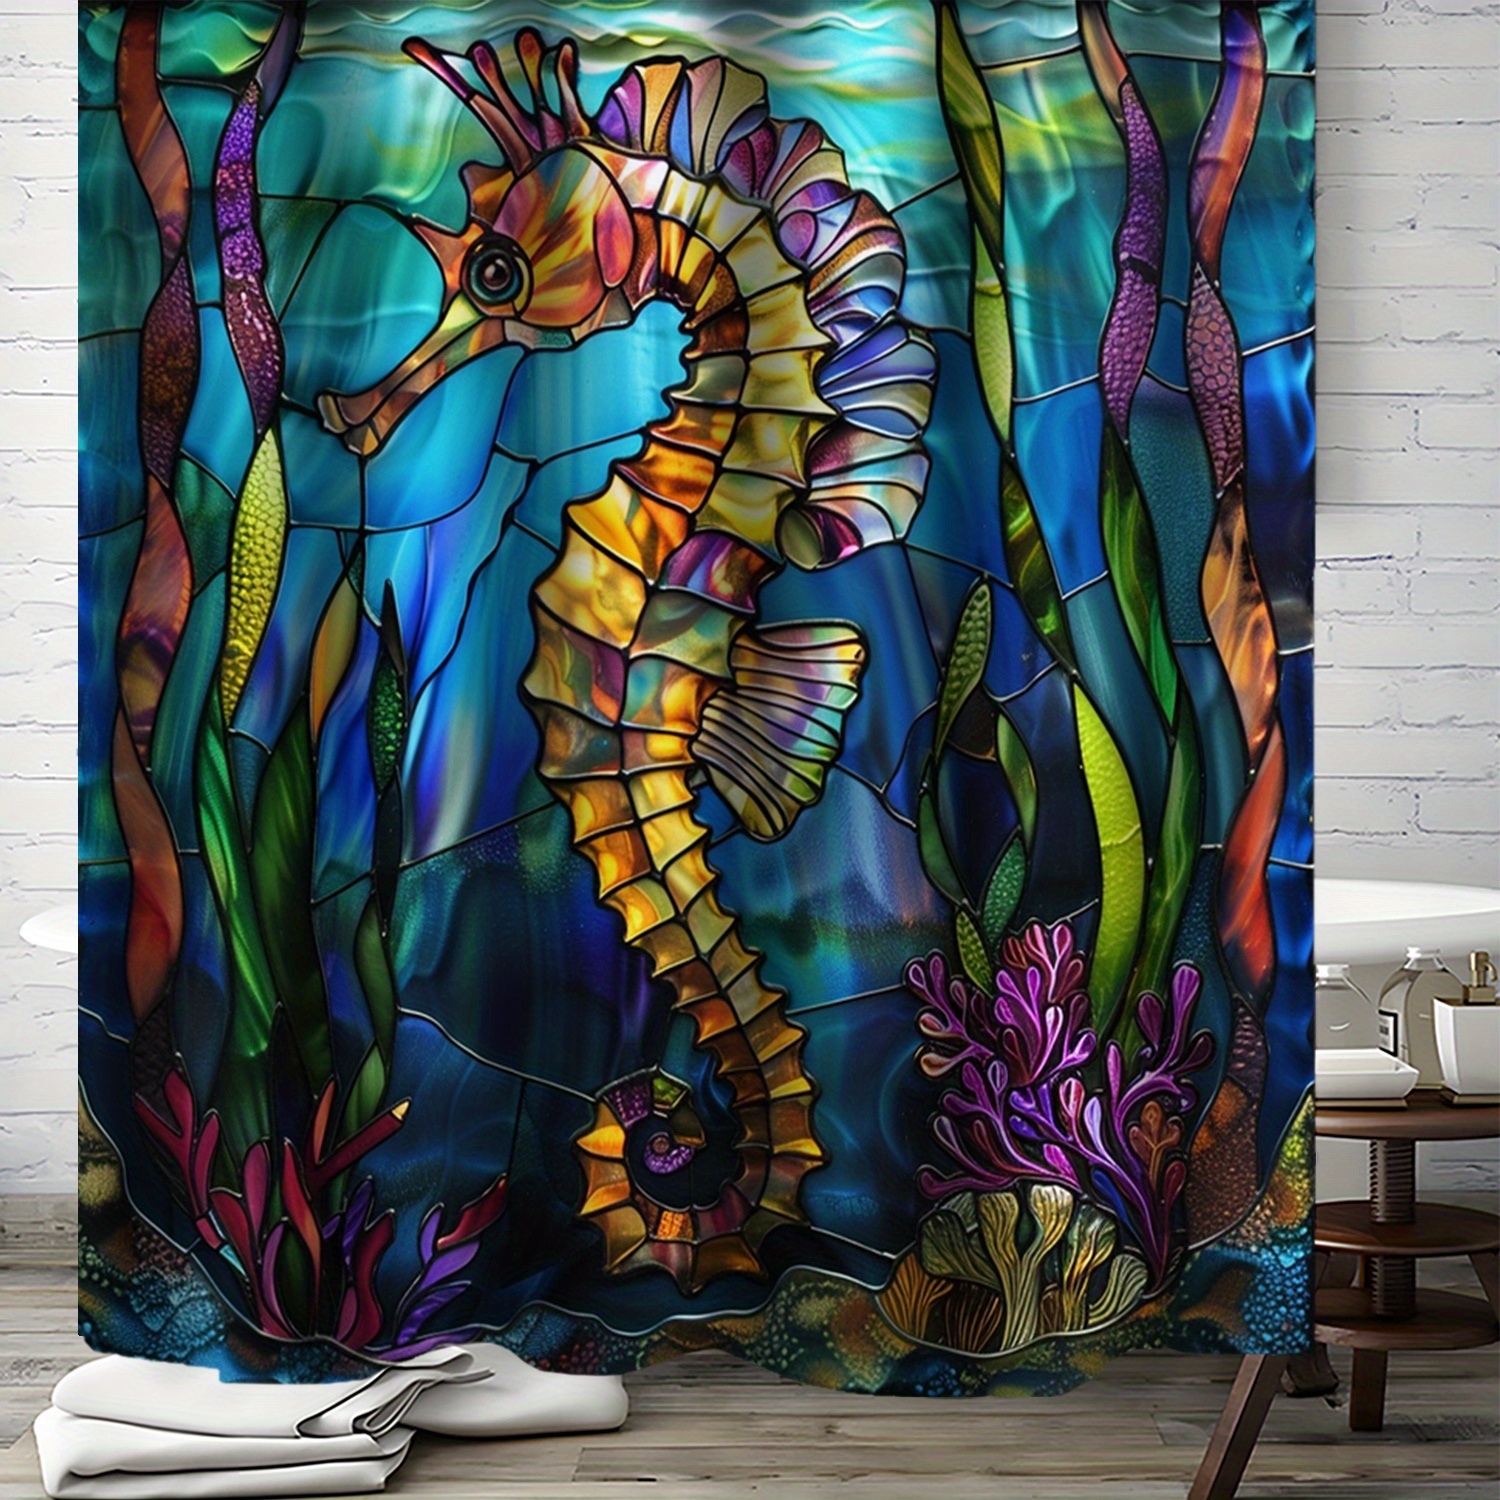 

Artistic Seahorse Stained Glass Style Shower Curtain With 12 Hooks, Water-resistant Polyester Bathroom Decor, Ocean Theme Bath Accessory, 71x71 Inches - Non-bleachable, Hook Included